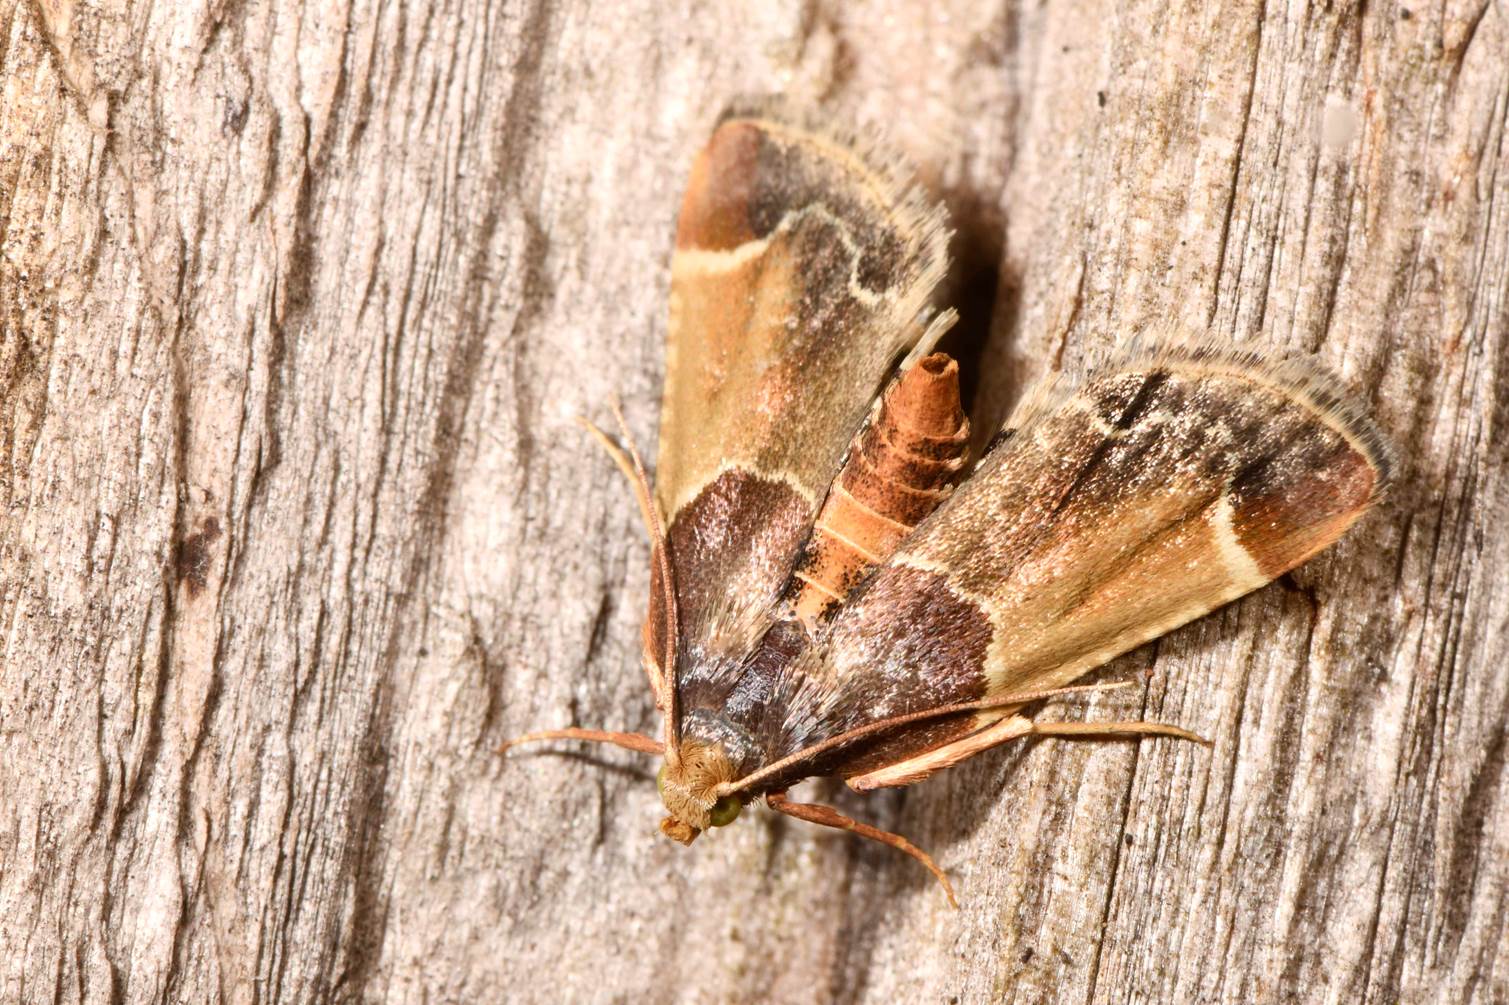 A moth on a wood surface

Description automatically generated with low confidence